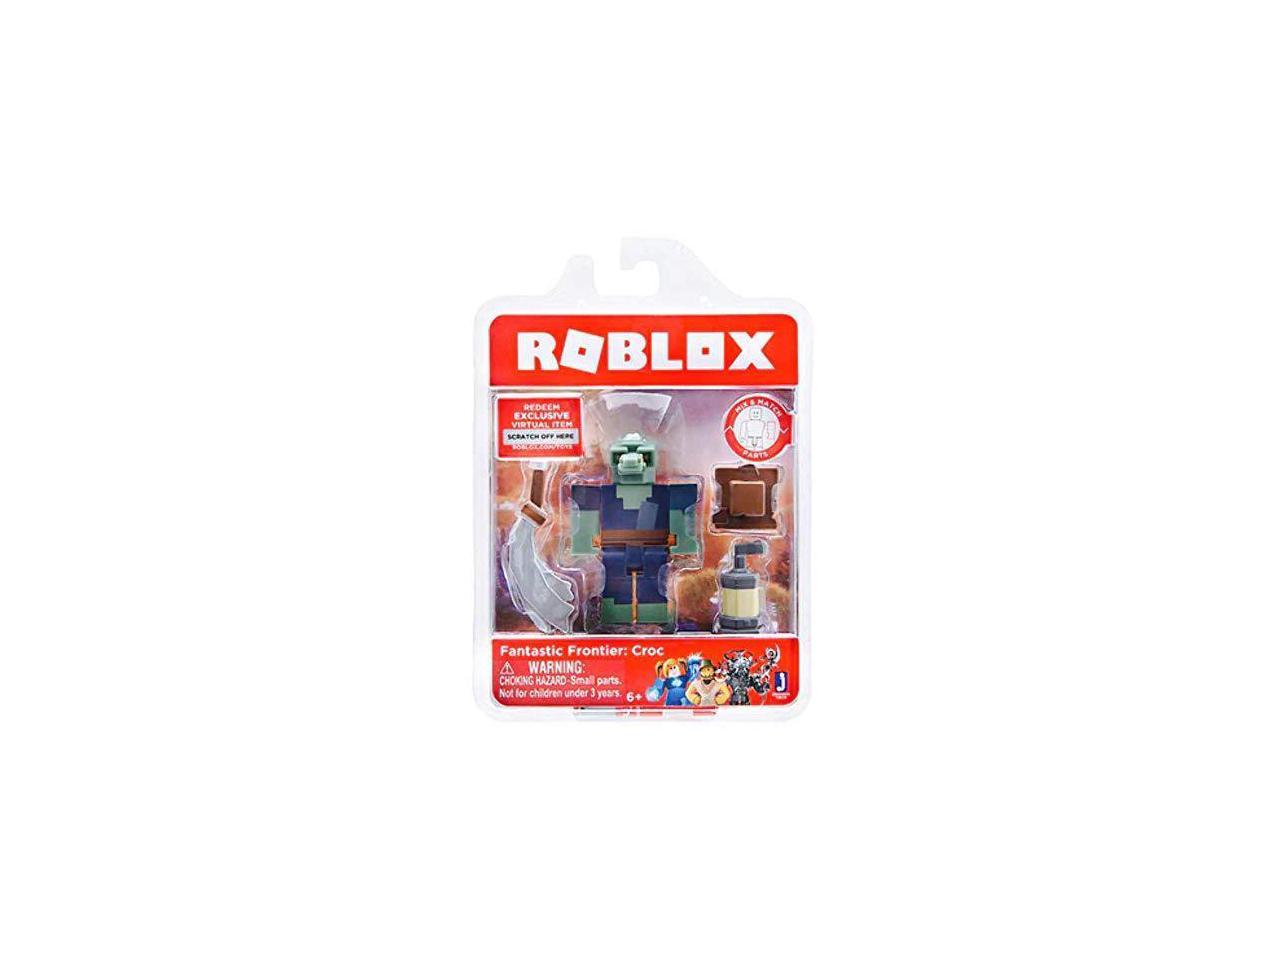 Roblox Fantastic Frontier Croc Single Figure Core Pack With Exclusive Virtual Item Code Newegg Com - roblox fantastic frontier health